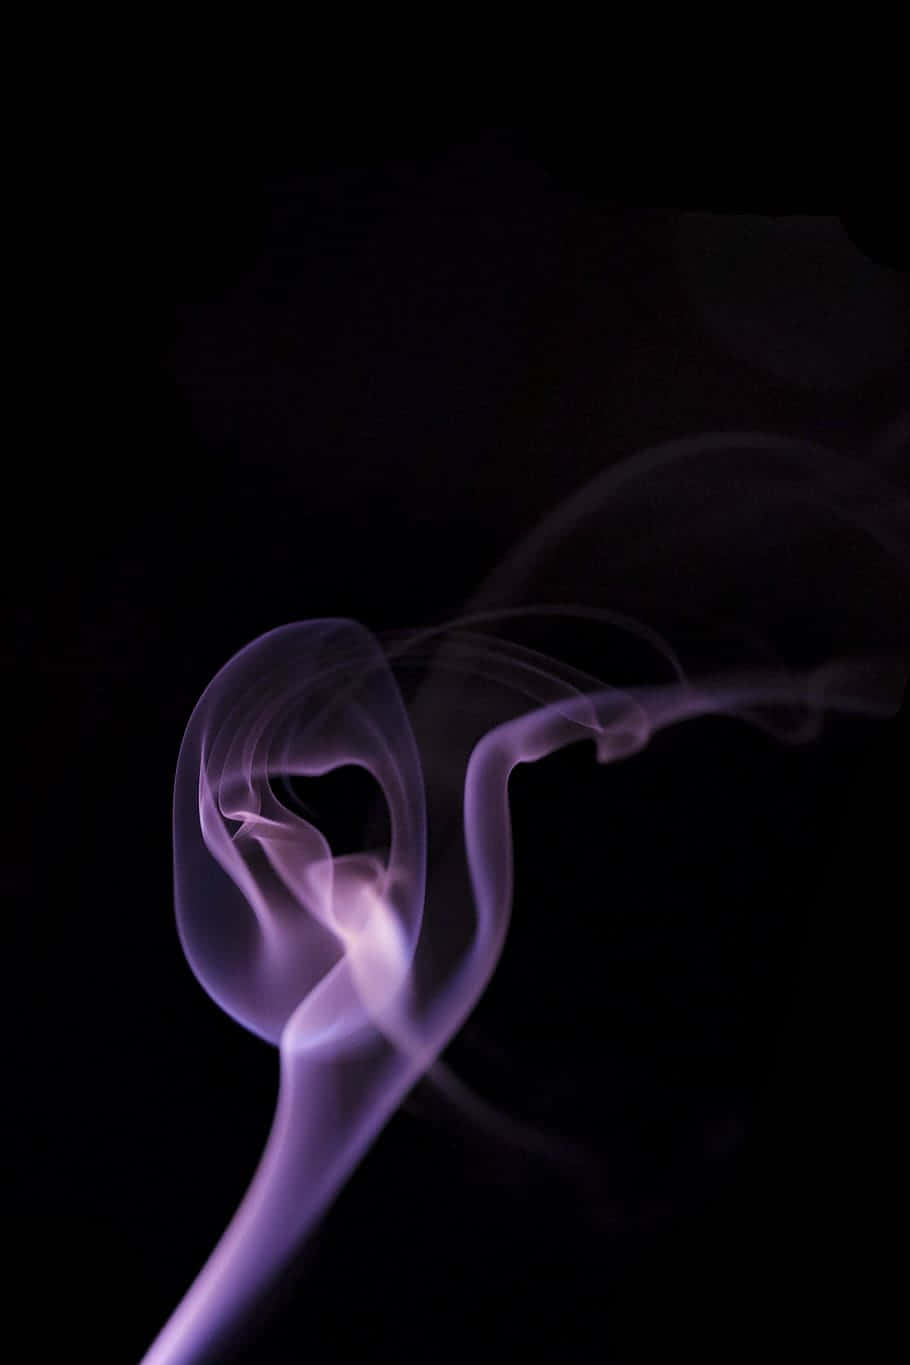 A Purple Smoke Is Blowing In The Air